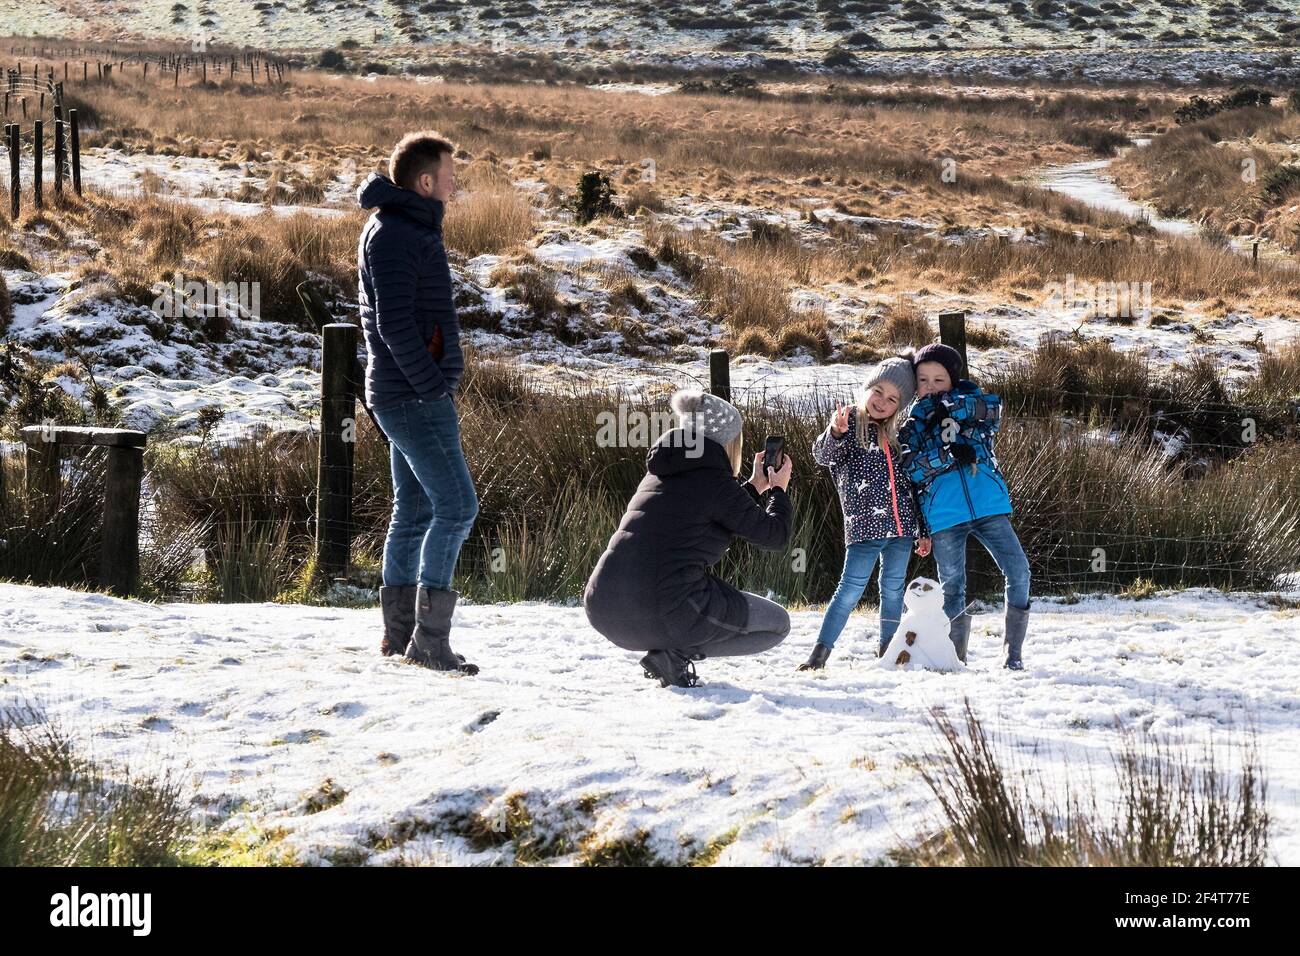 A faily having fun in the Snow on the wild rugged Bodmin Moor in Cornwall. Stock Photo